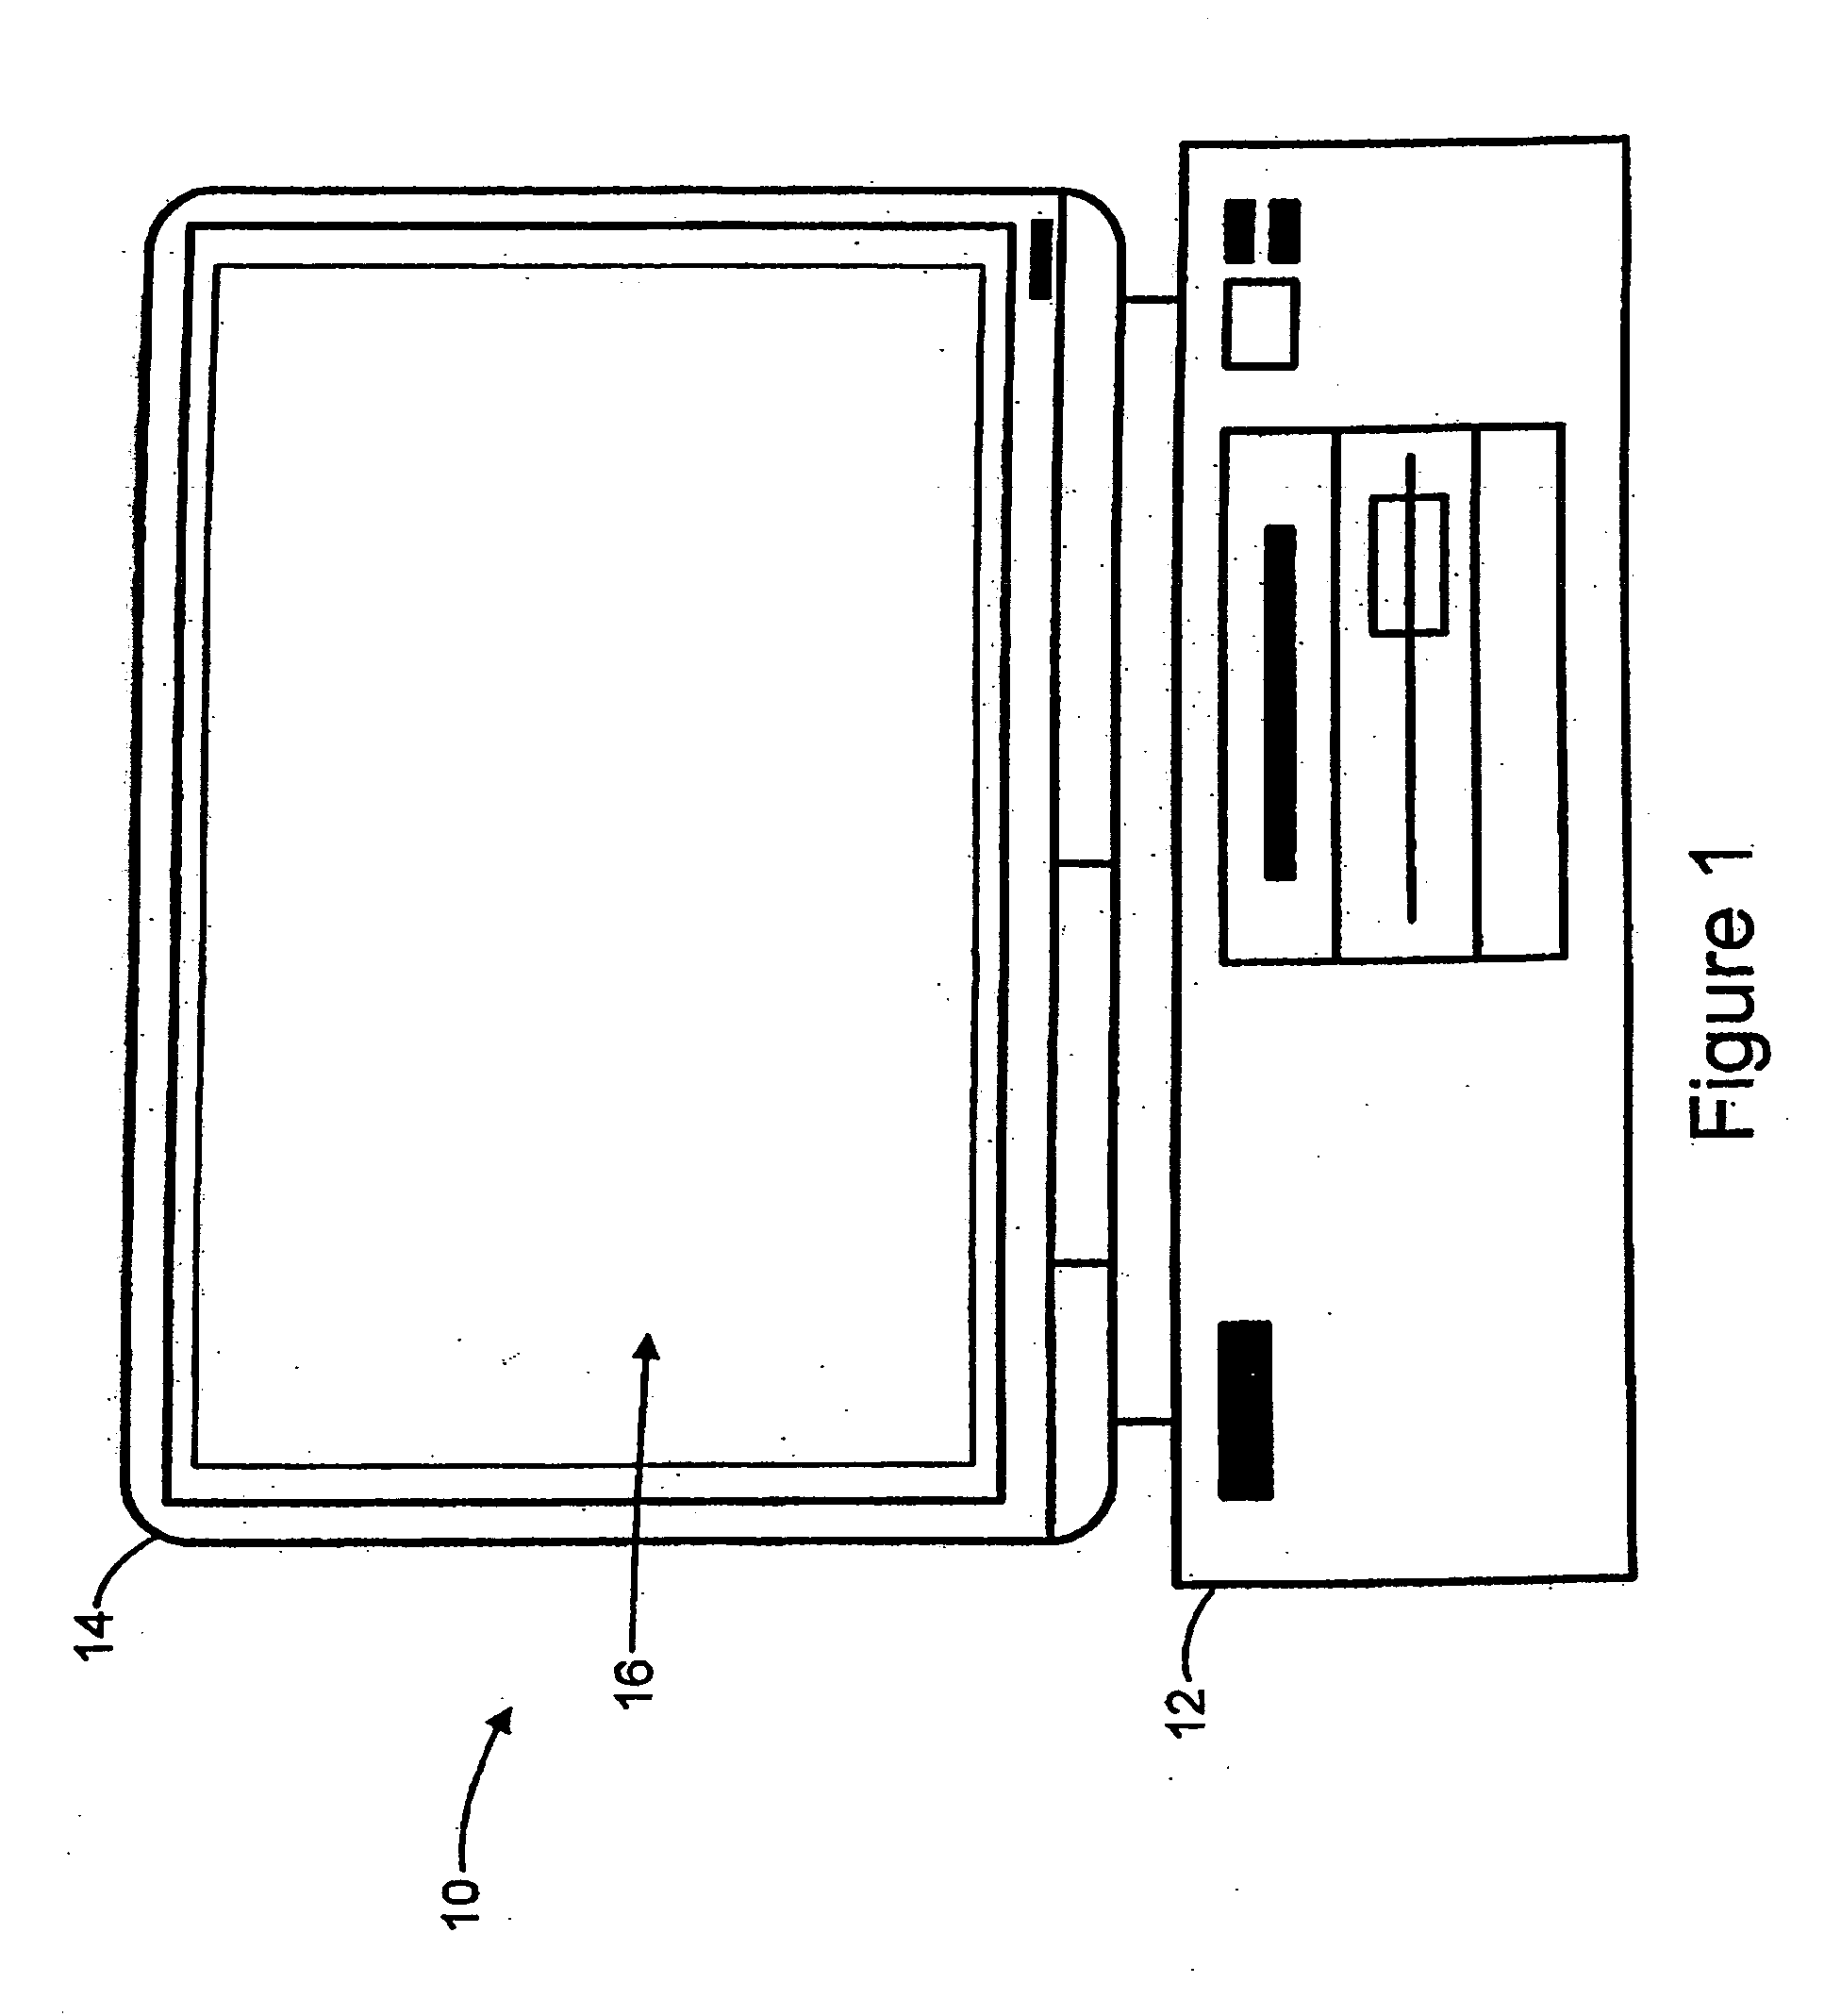 Electronic file system graphical user interface